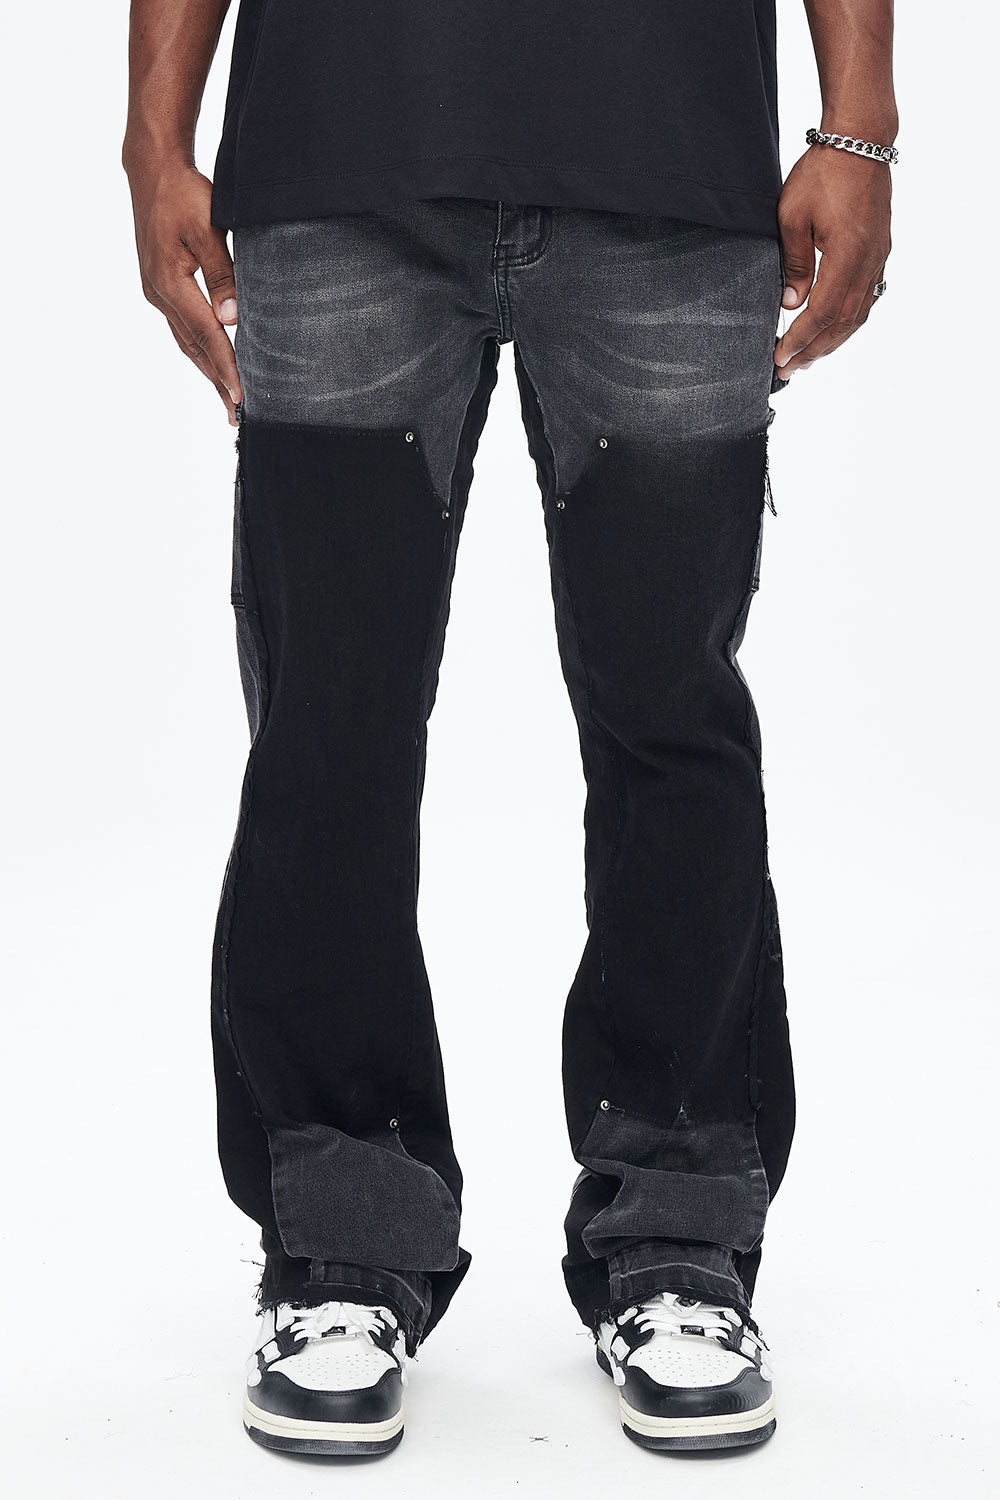 Gingtto Men's Bell-Bottom Flare Jeans: Classic Style with a Modern Twist